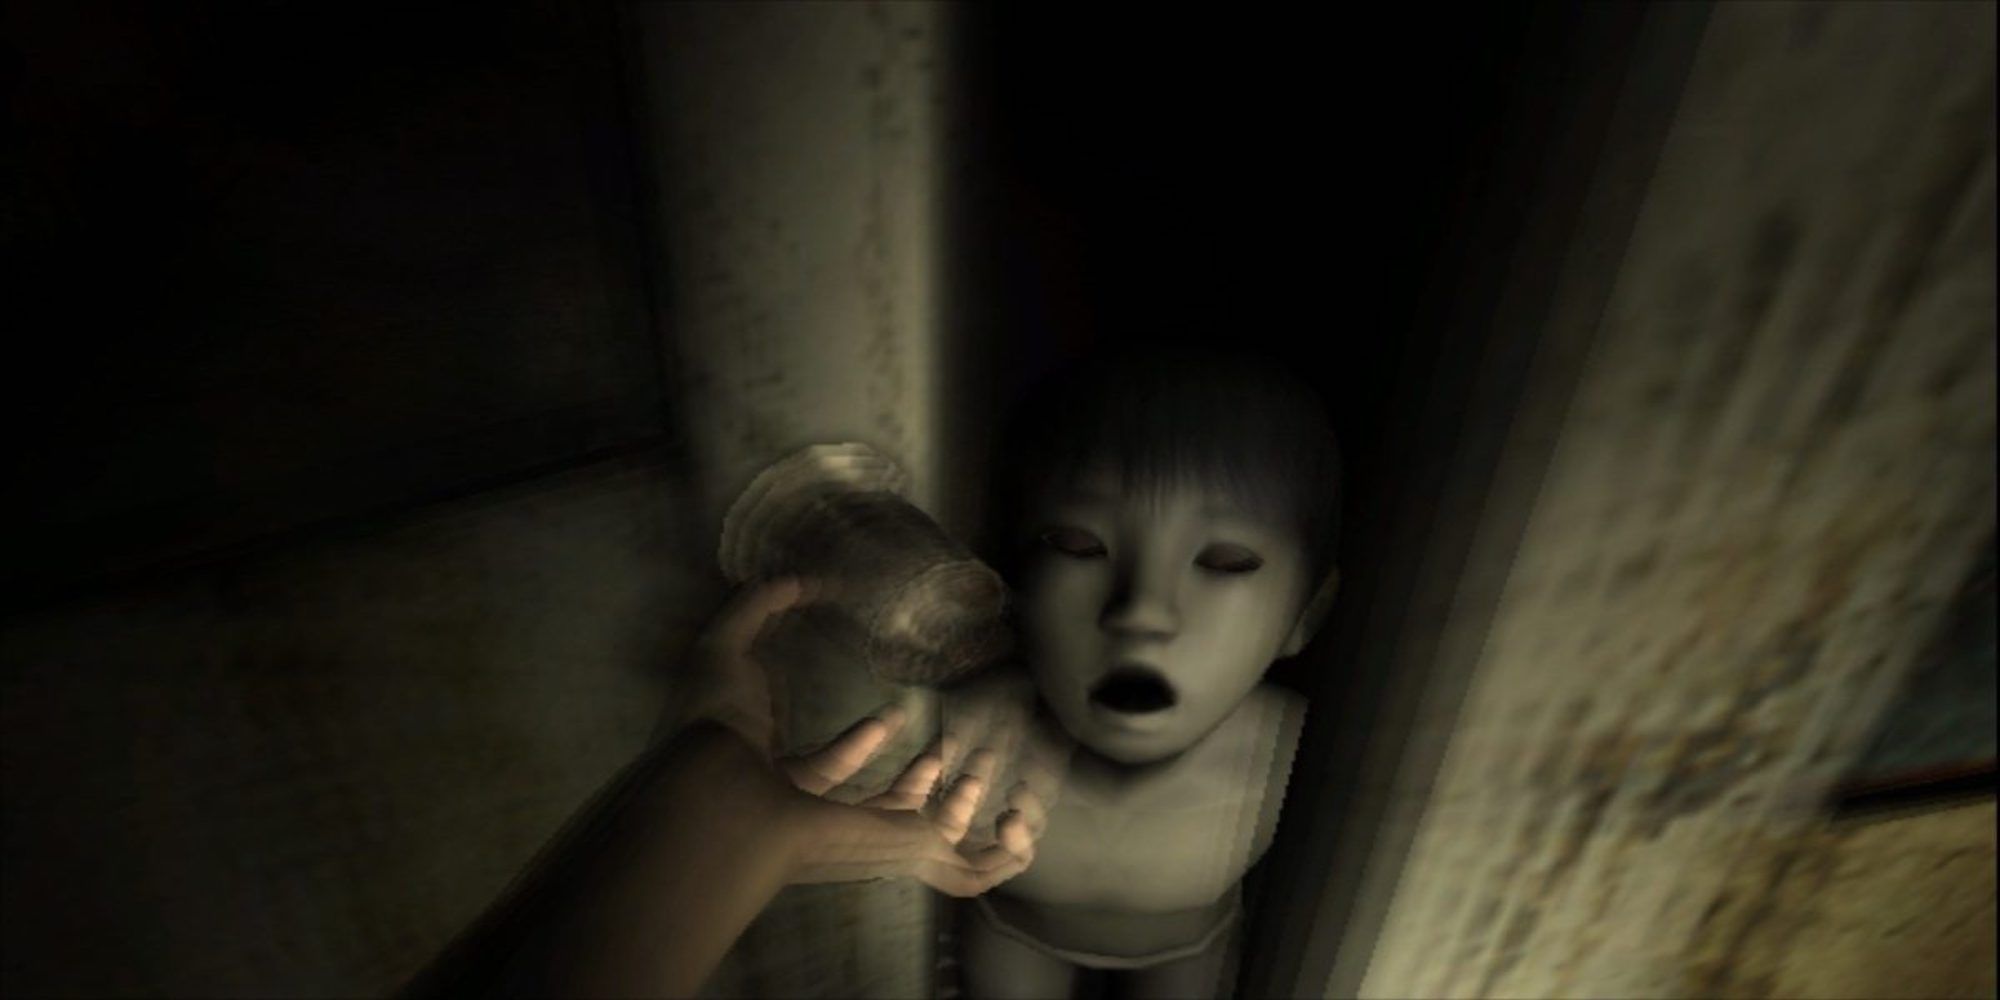 Gameplay from Ju-On: The Grudge